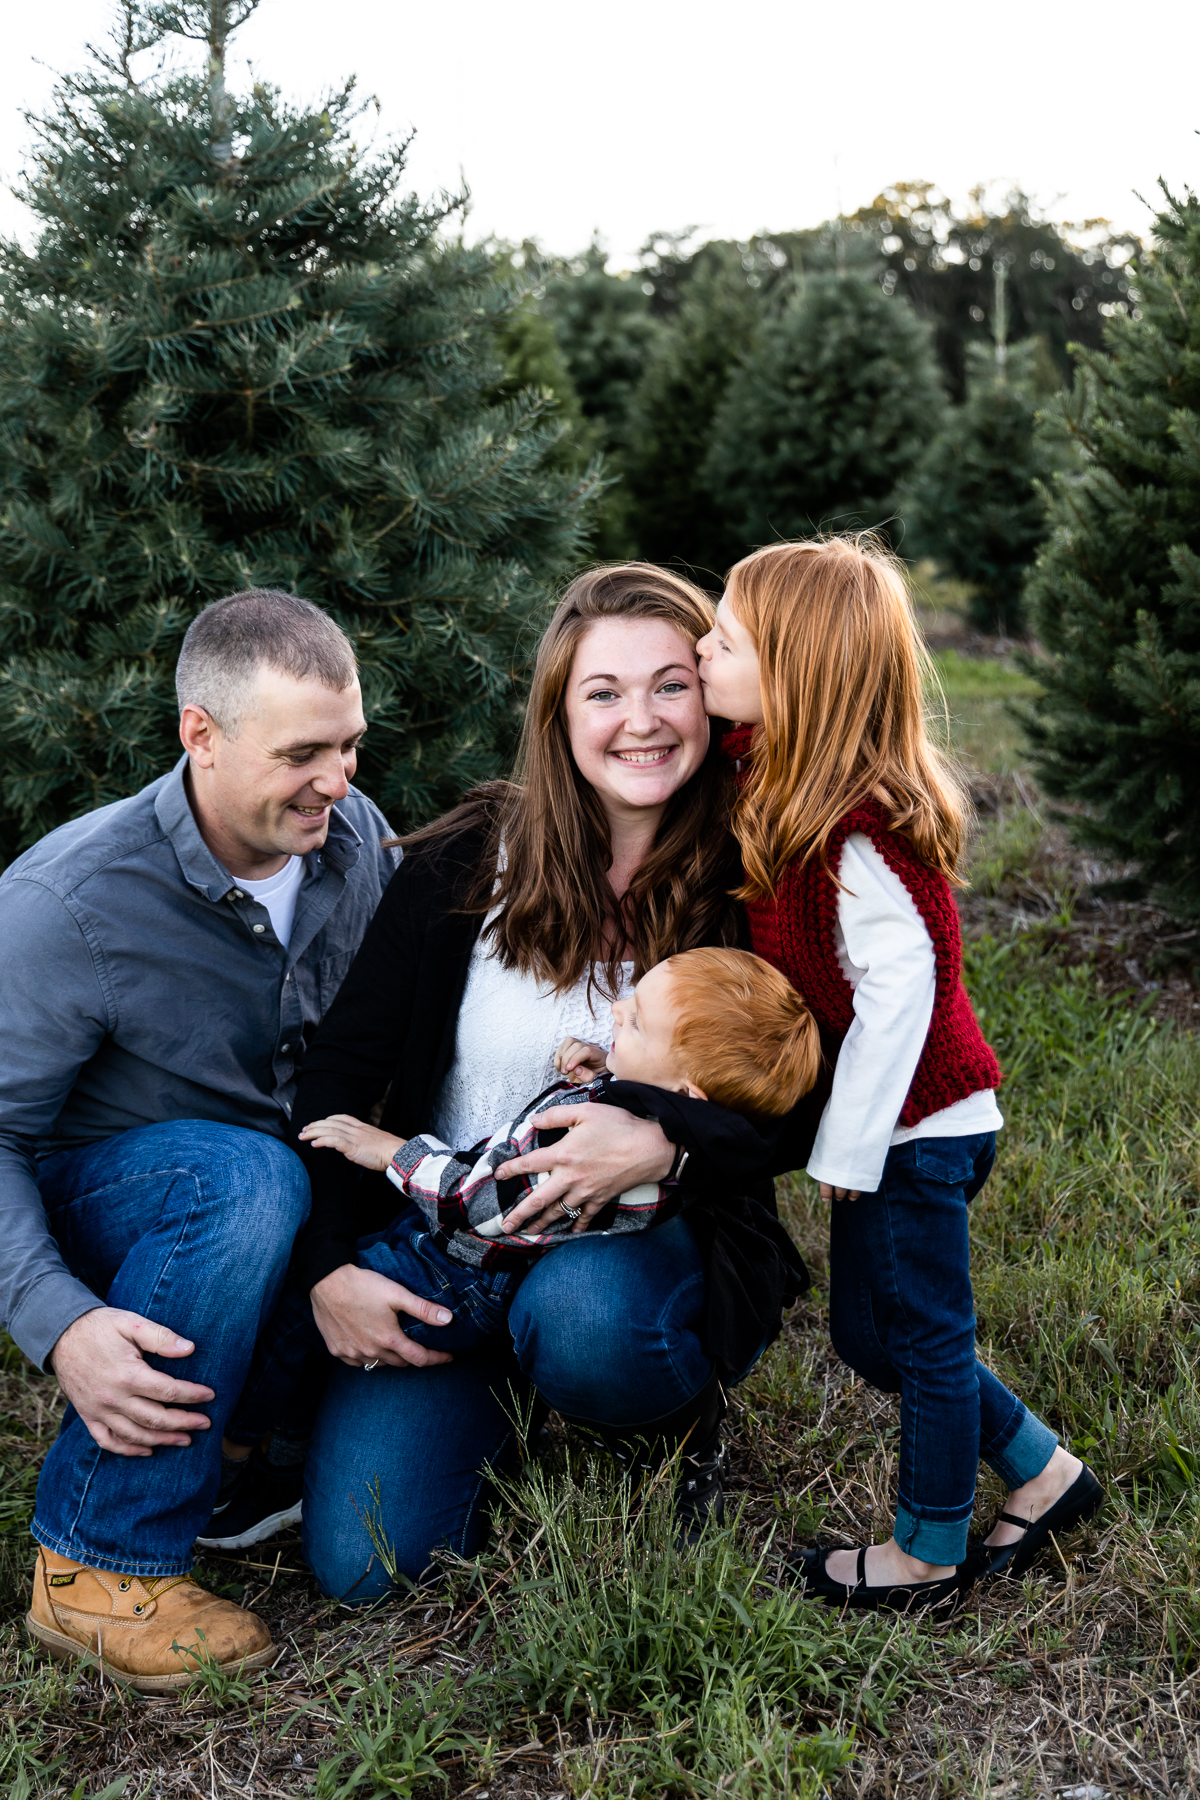 Family snuggling together at Christmas Tree Farm